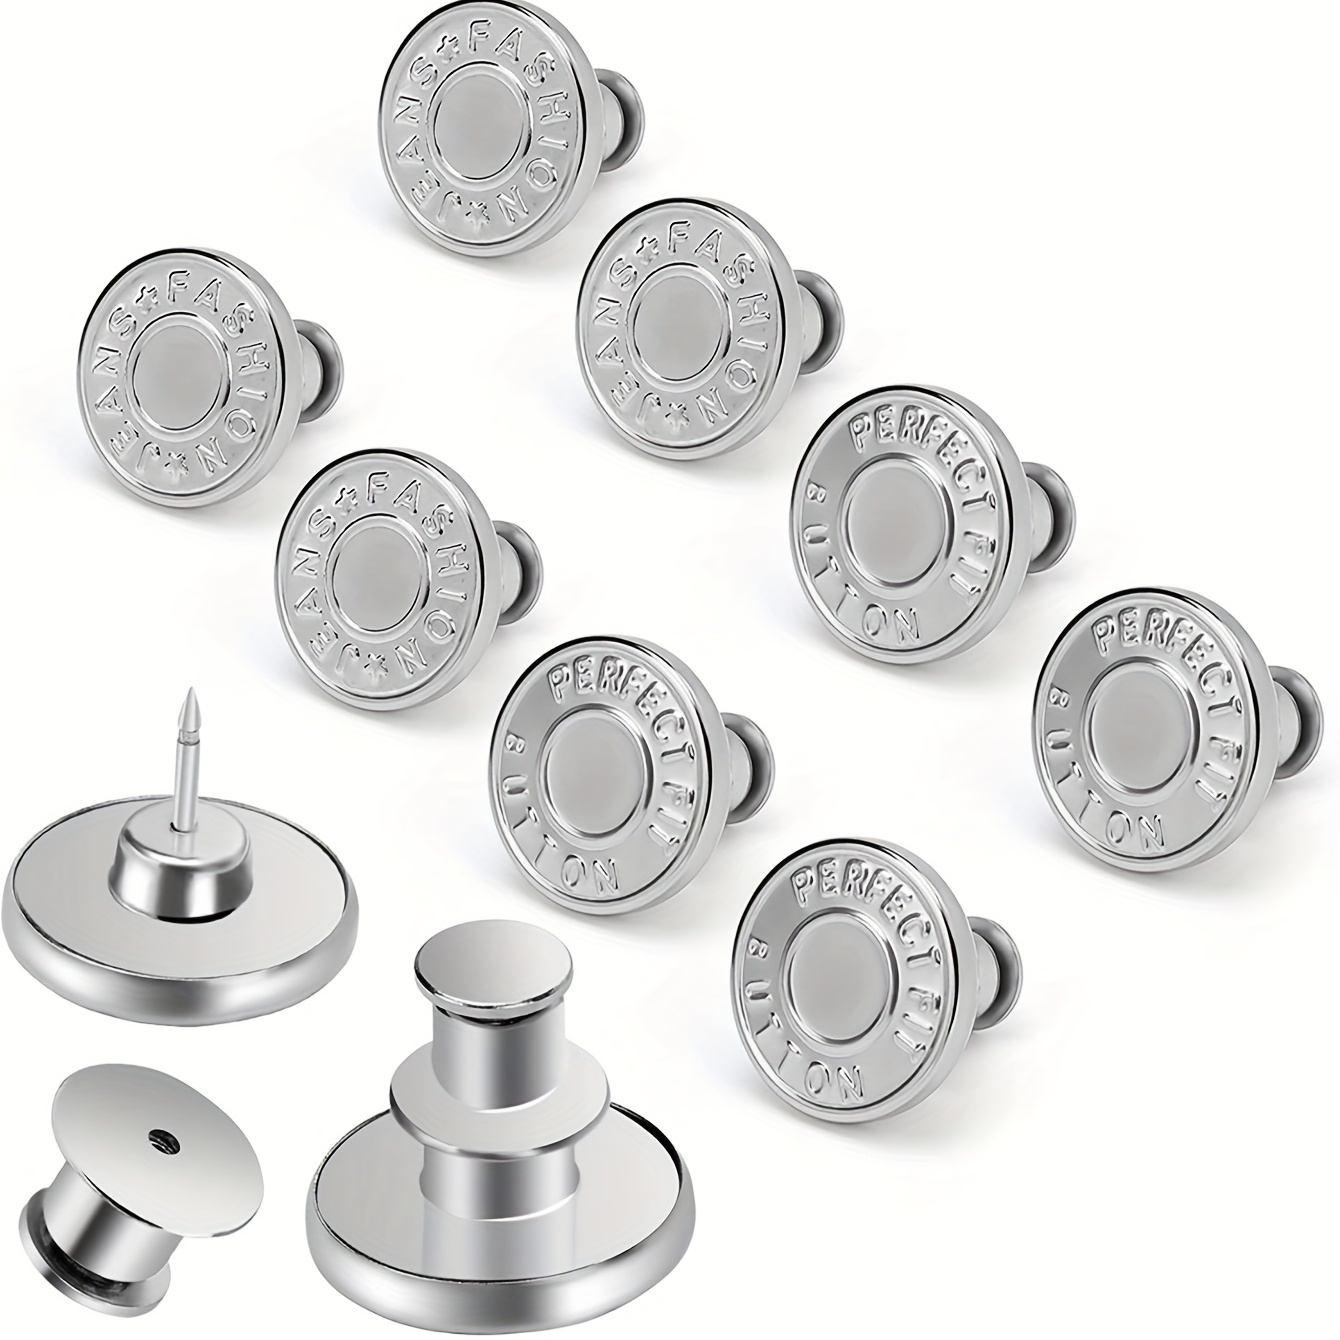 6pcs Combination Set: Instant No Sew Metal Button For Jeans With